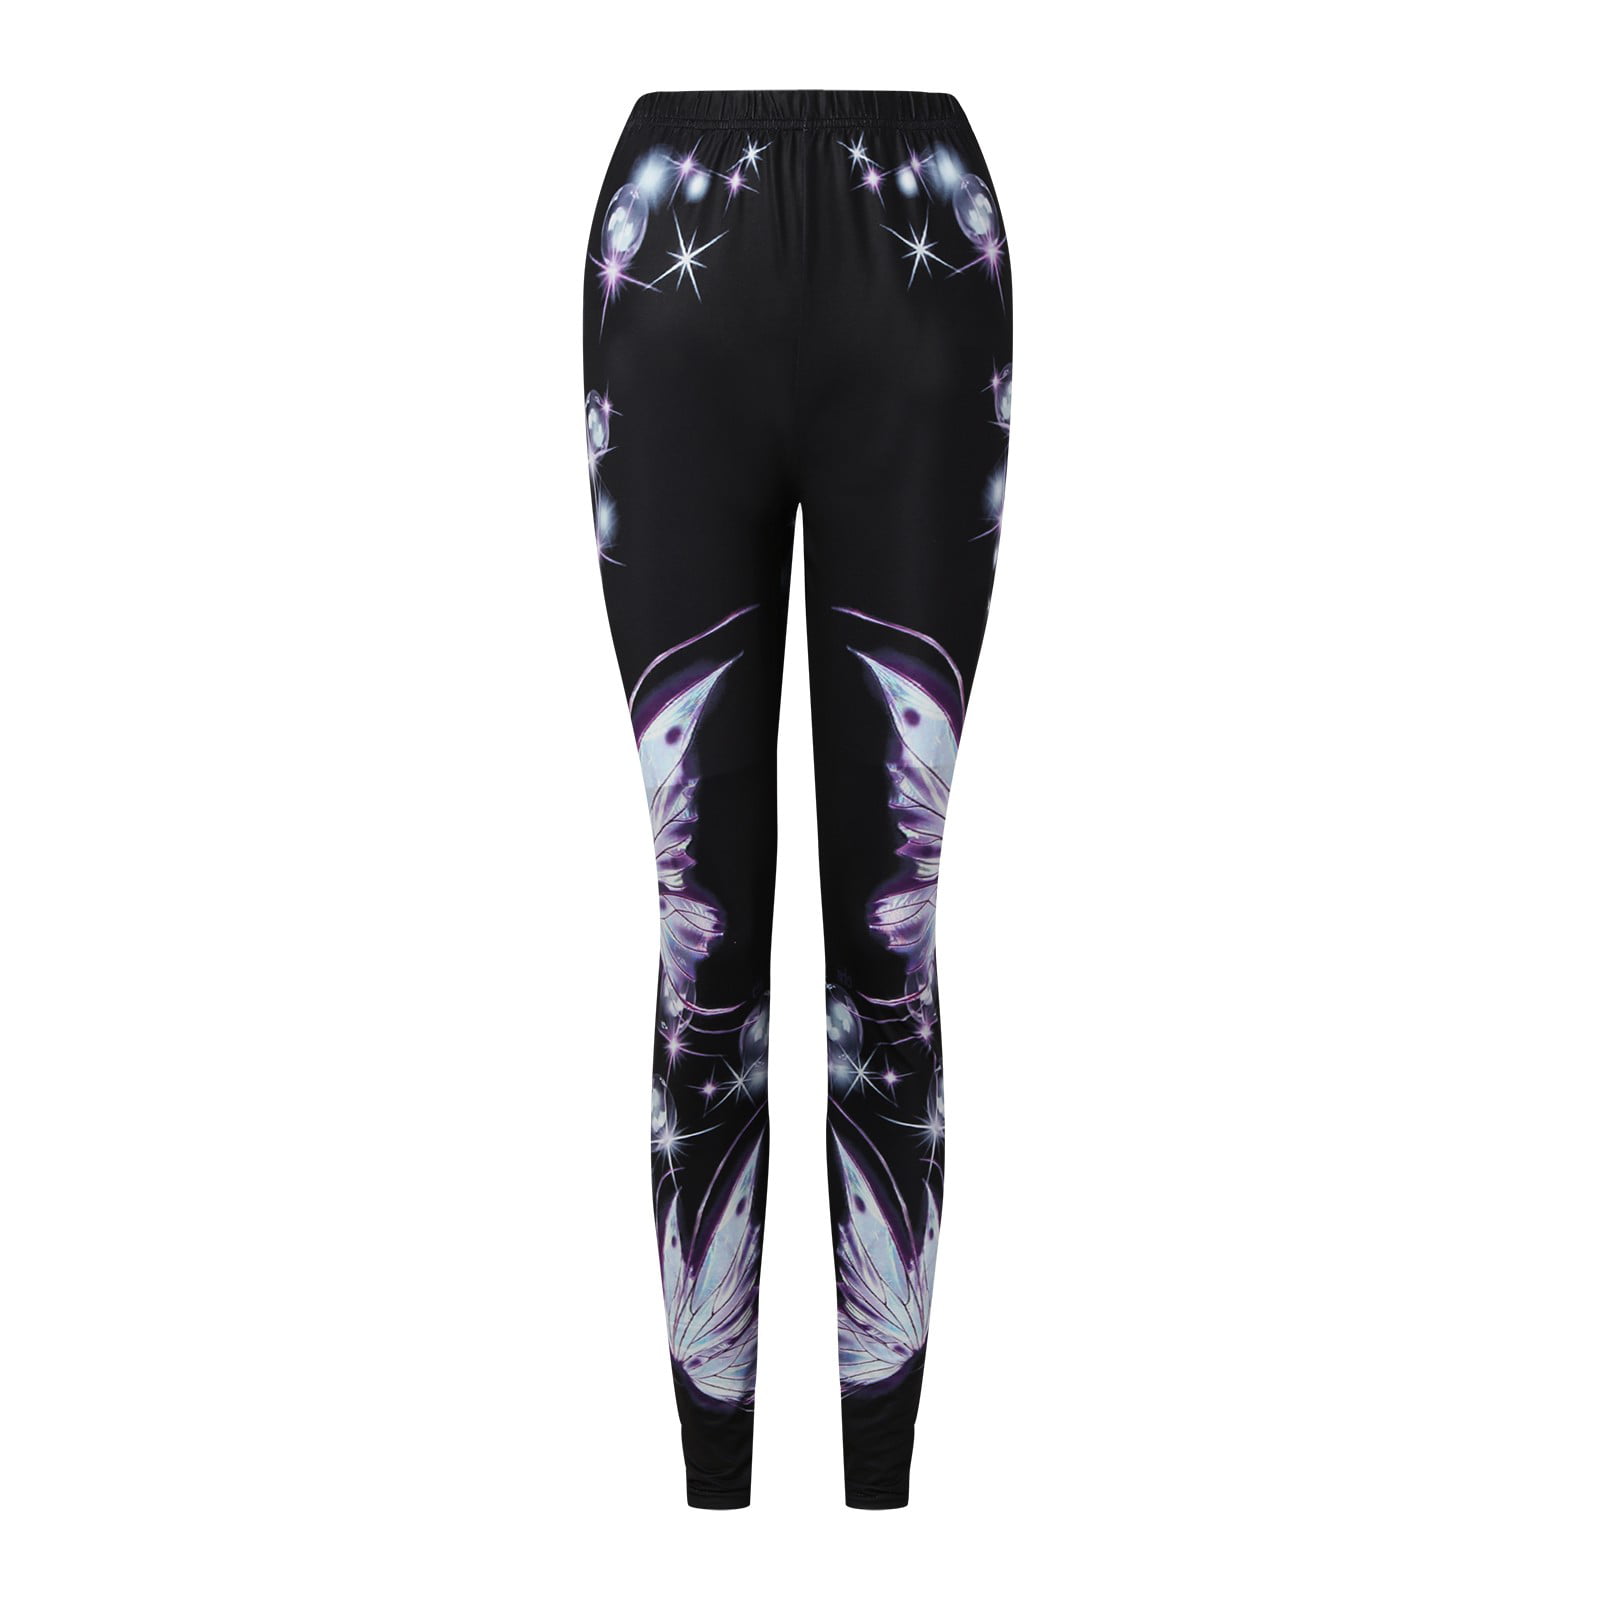 Womens Printed Yoga Leggings Sports Fitness Gym Active High Waist Stretch Pants 